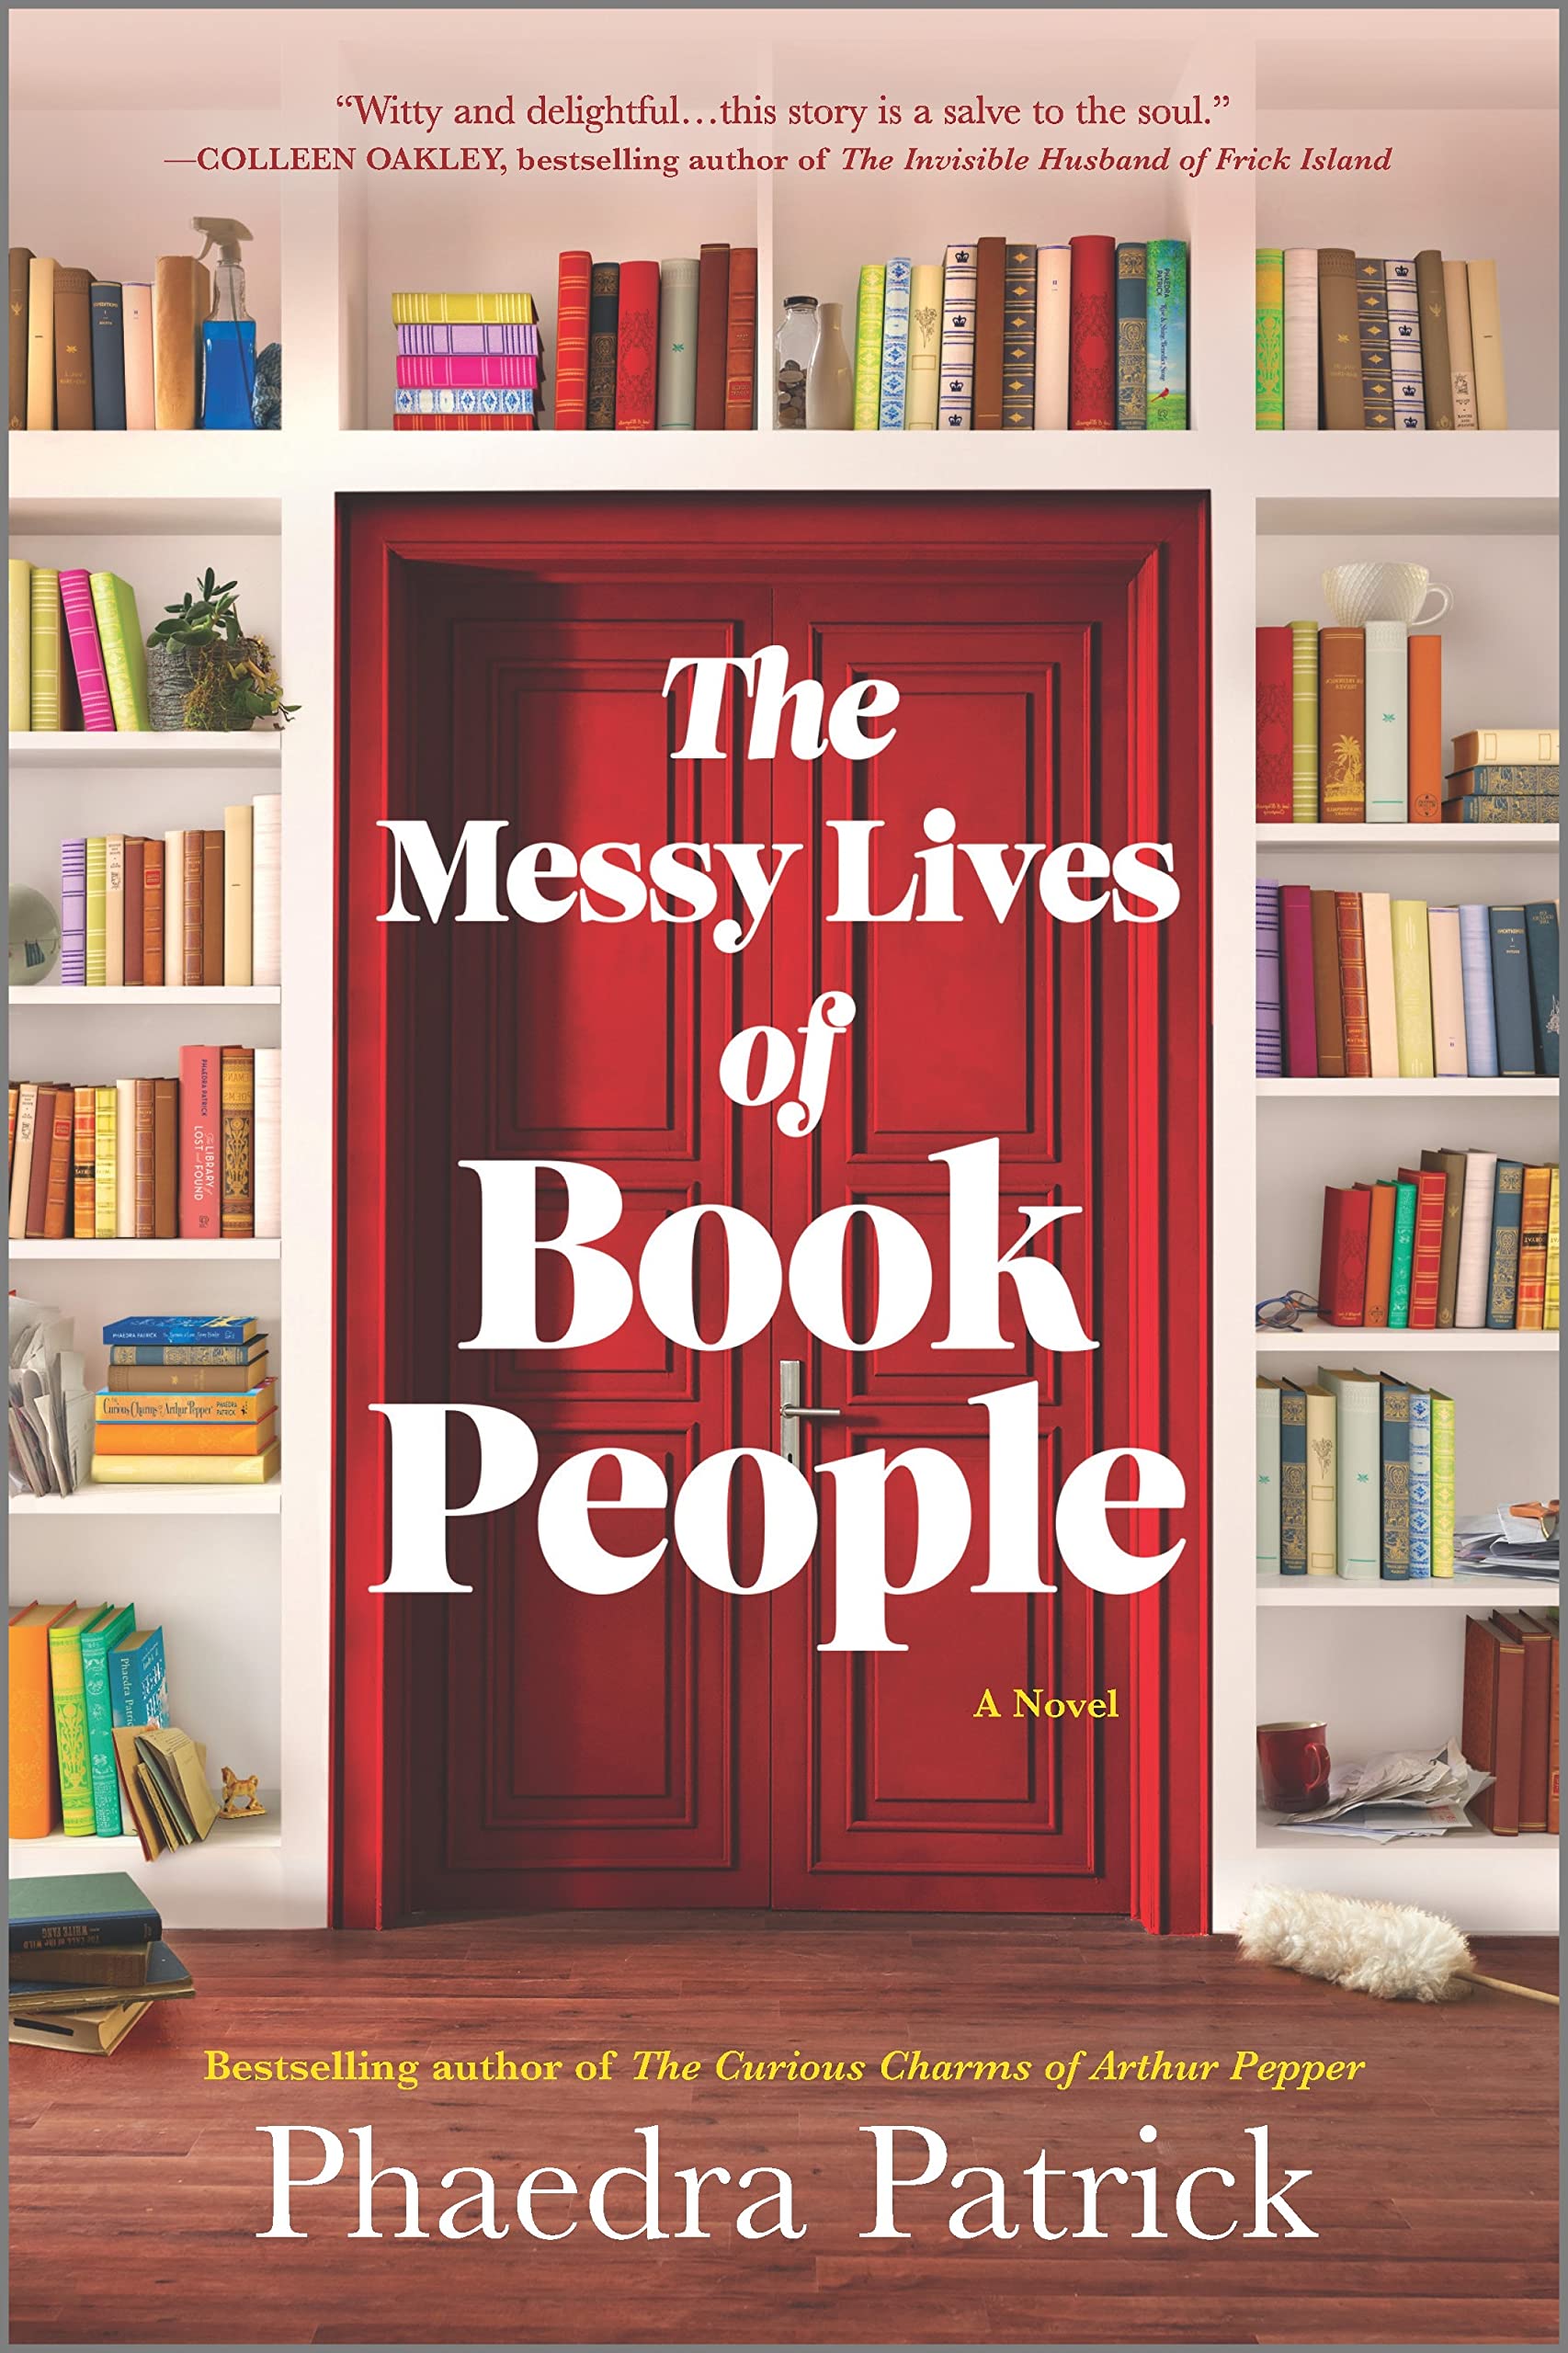 Image for "The Messy Lives of Book People : A Novel"